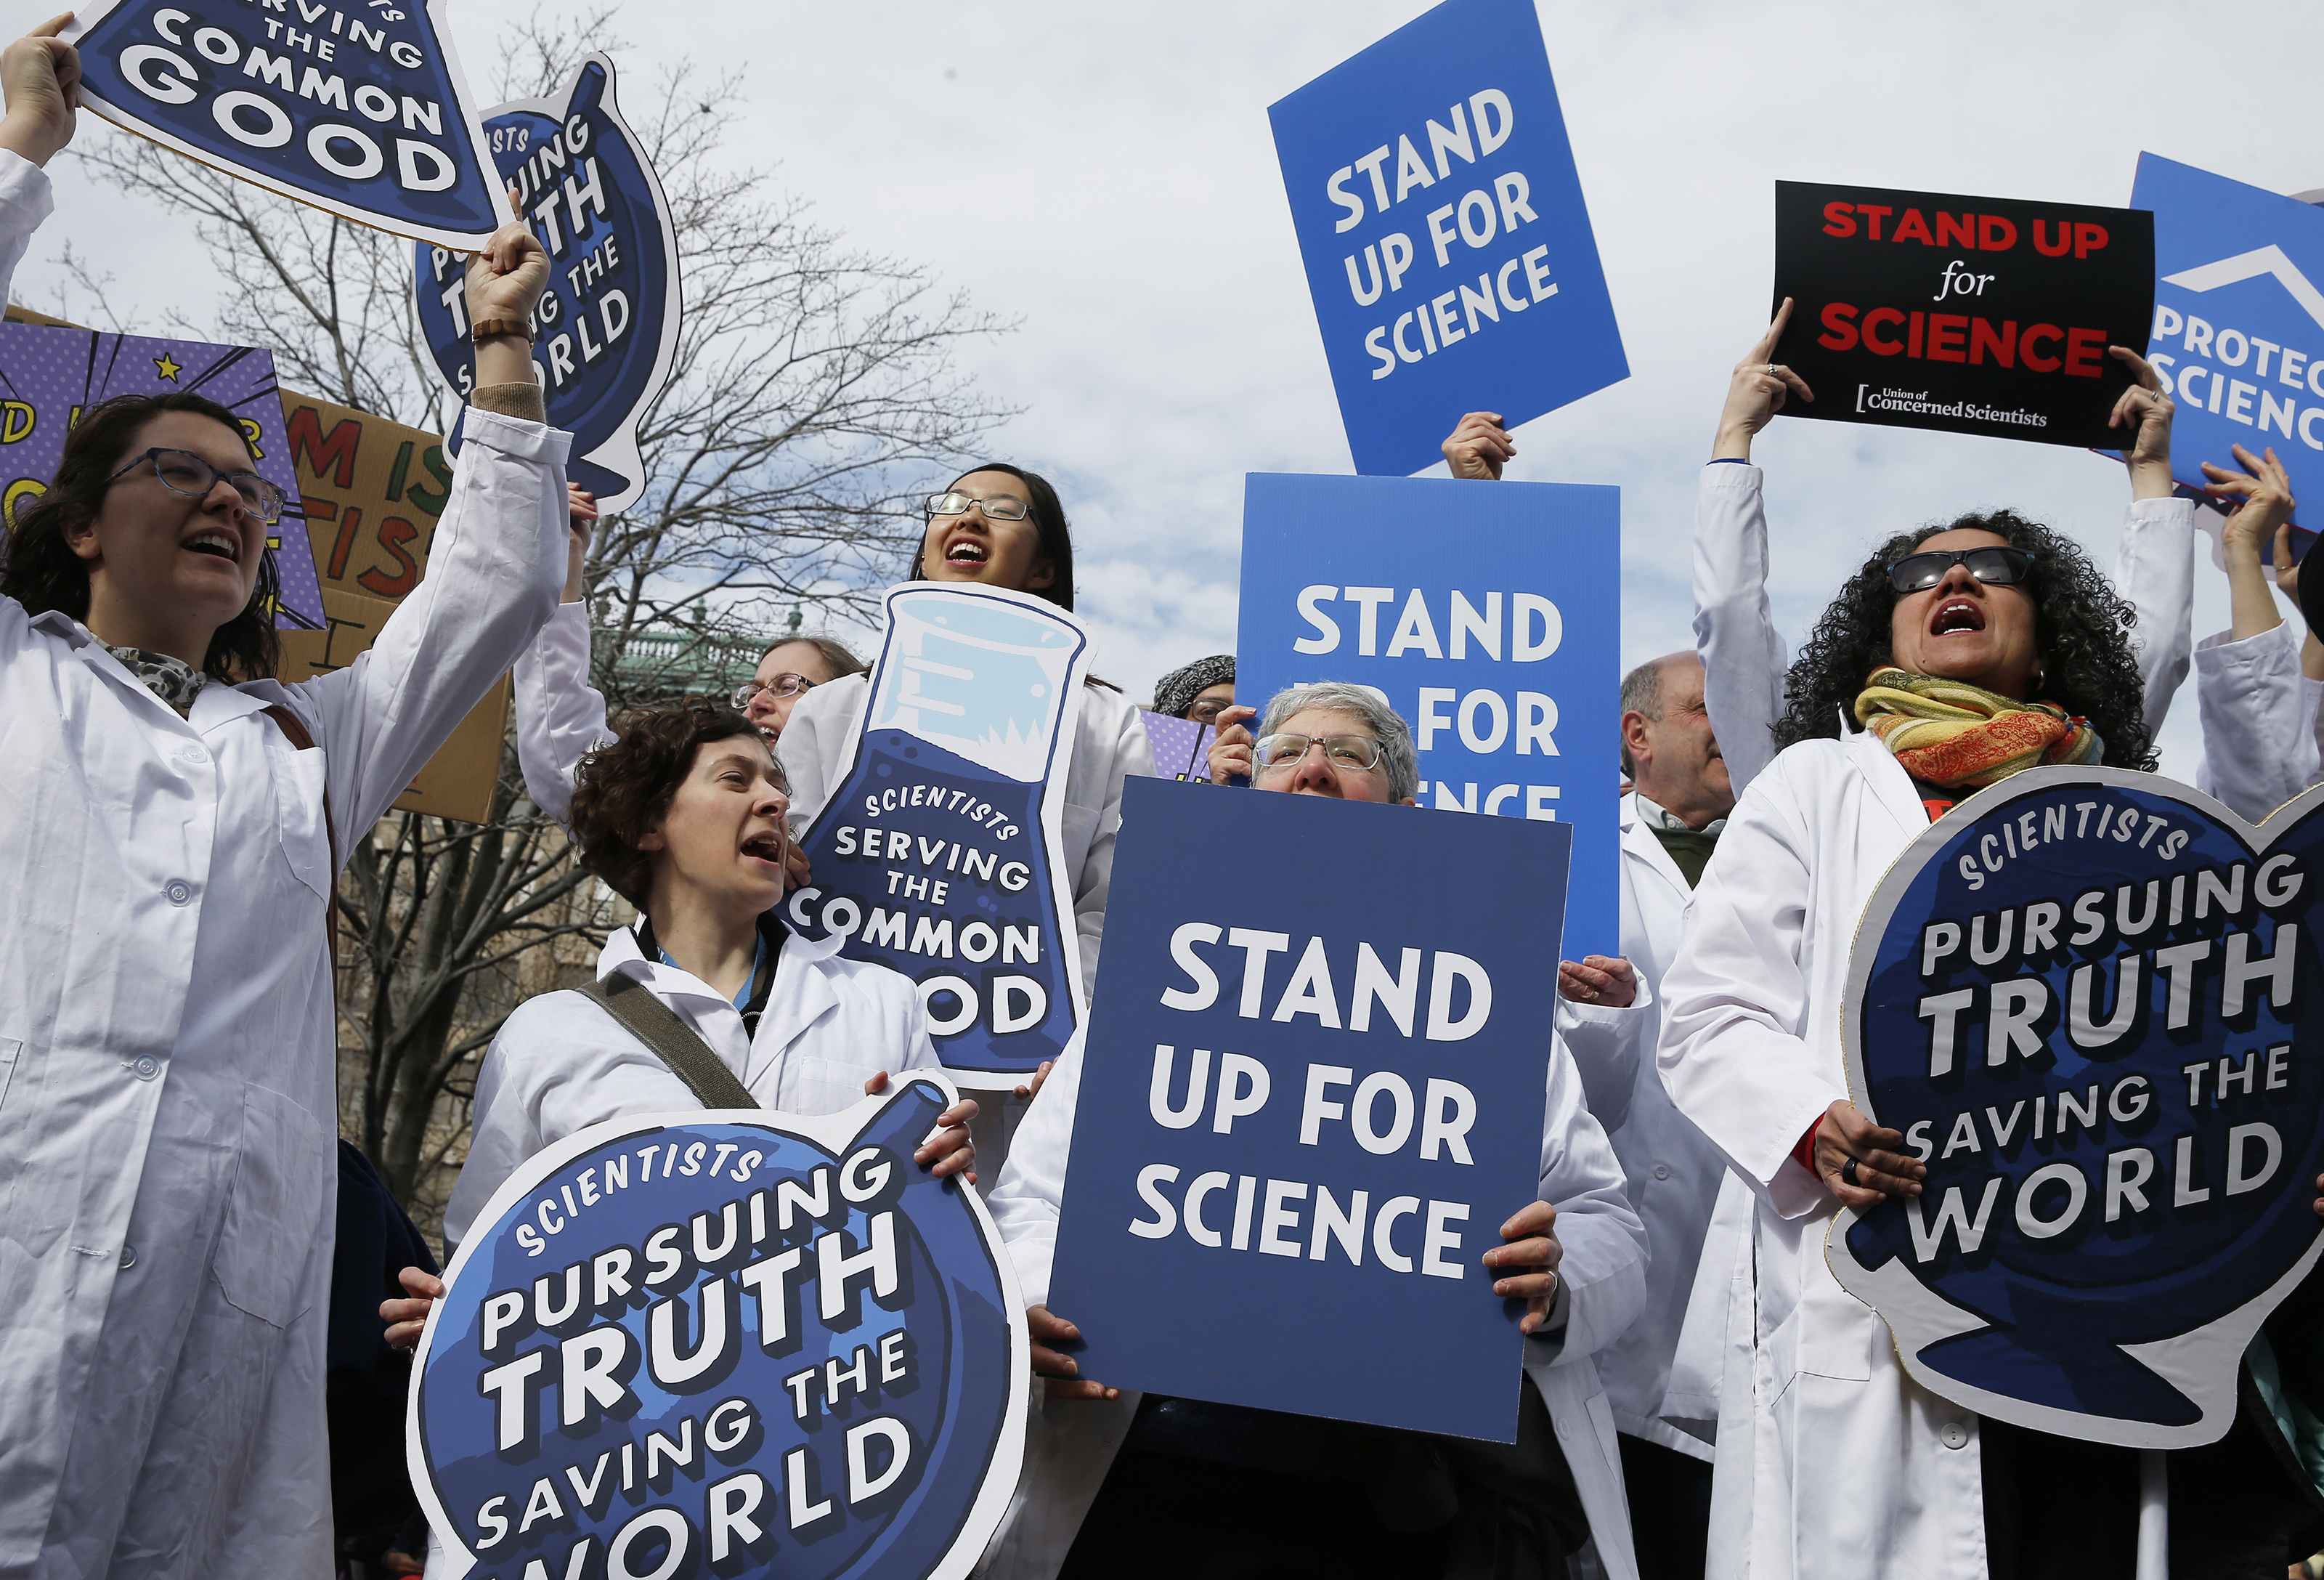 Science advocates in Copley Square in February 2017 for a Rally to Stand up for Science.